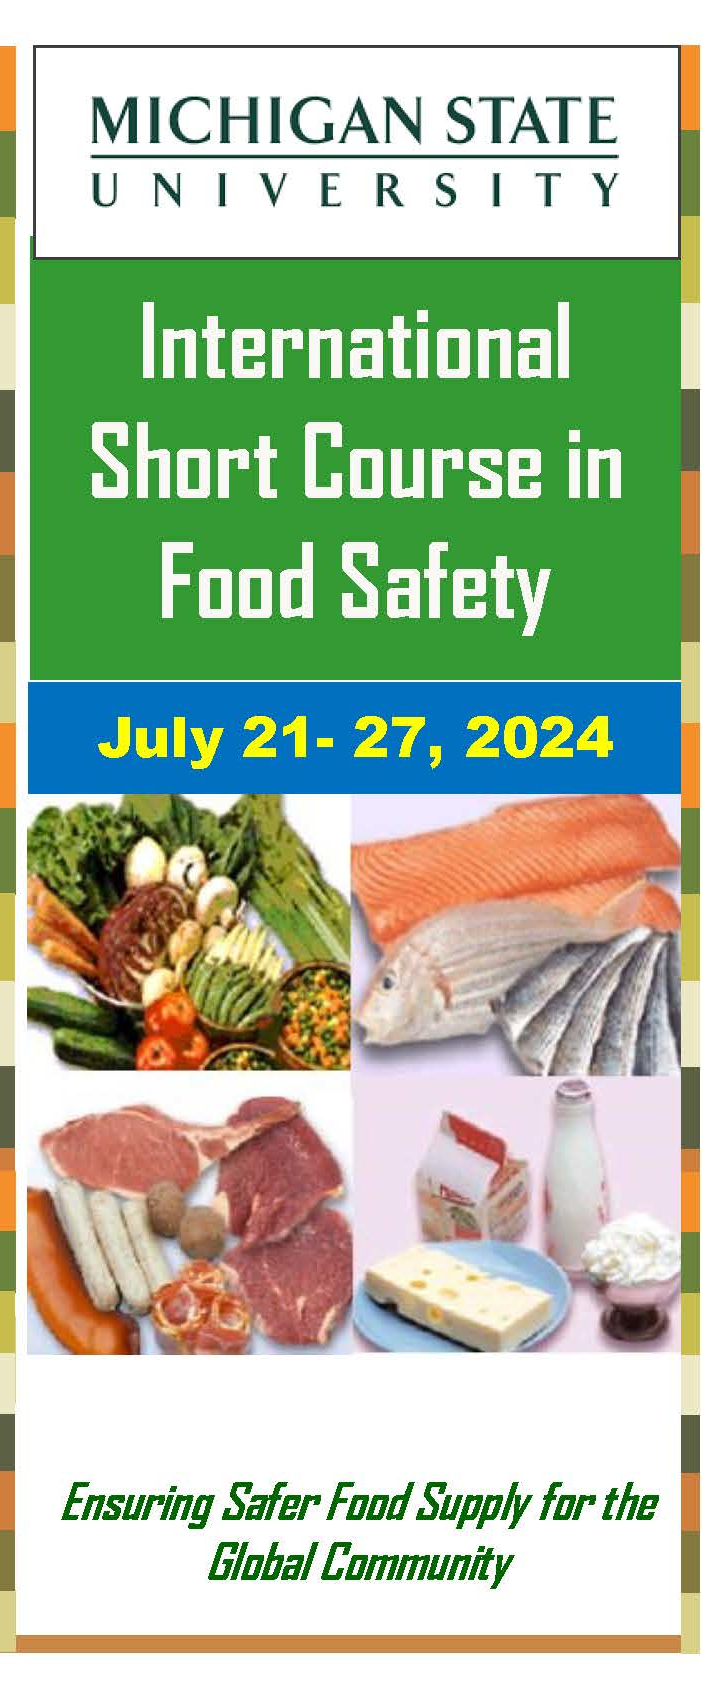 Food Safety Course Brochure 2024.jpg